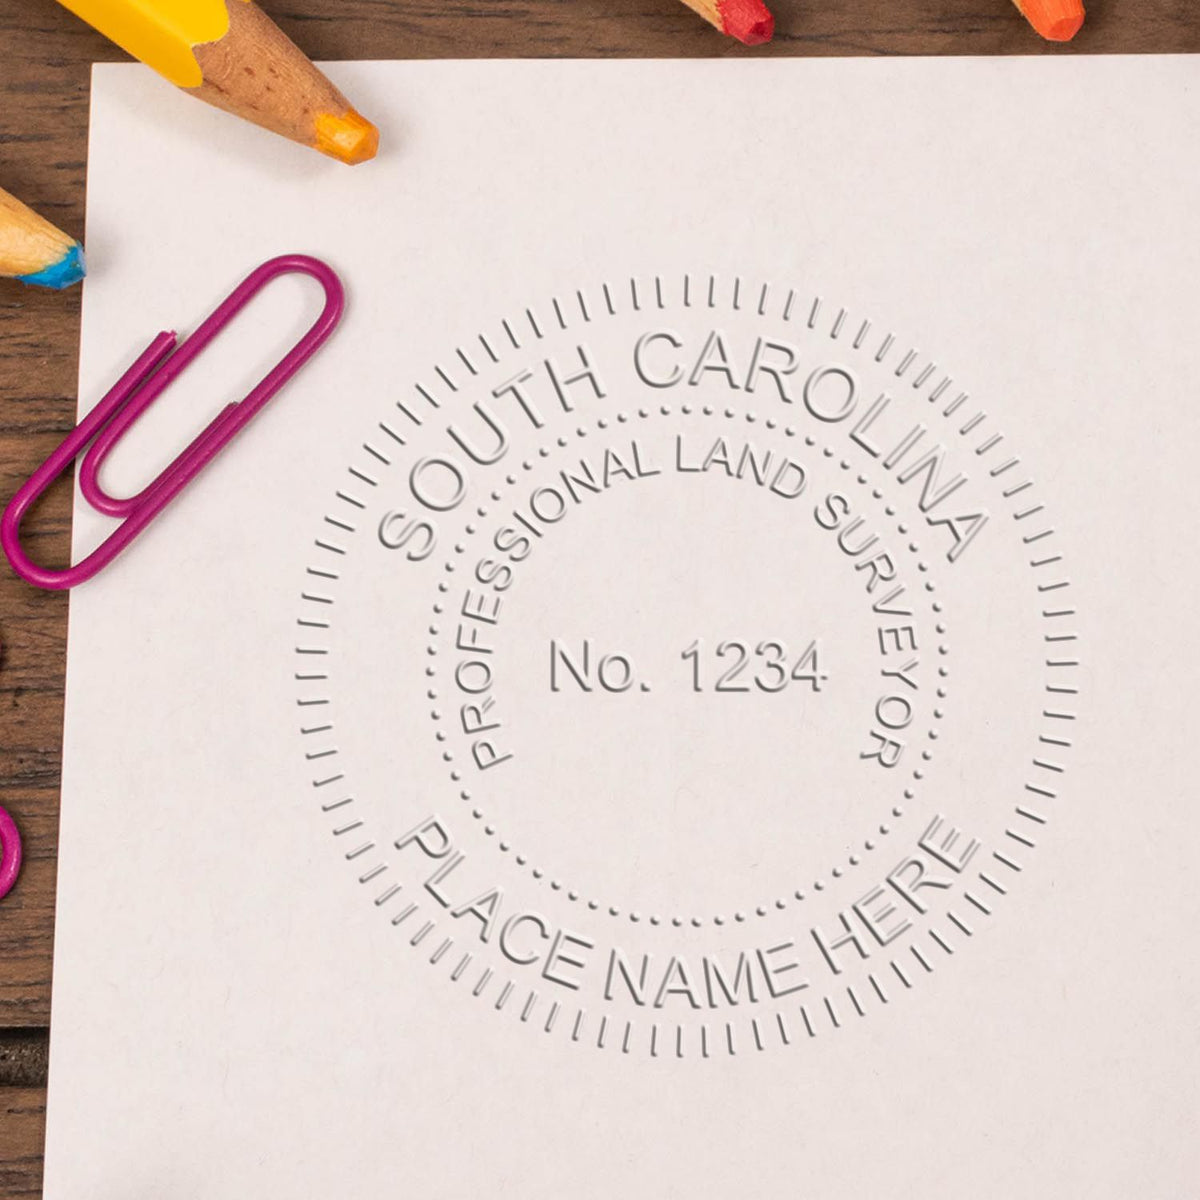 A photograph of the Hybrid South Carolina Land Surveyor Seal stamp impression reveals a vivid, professional image of the on paper.